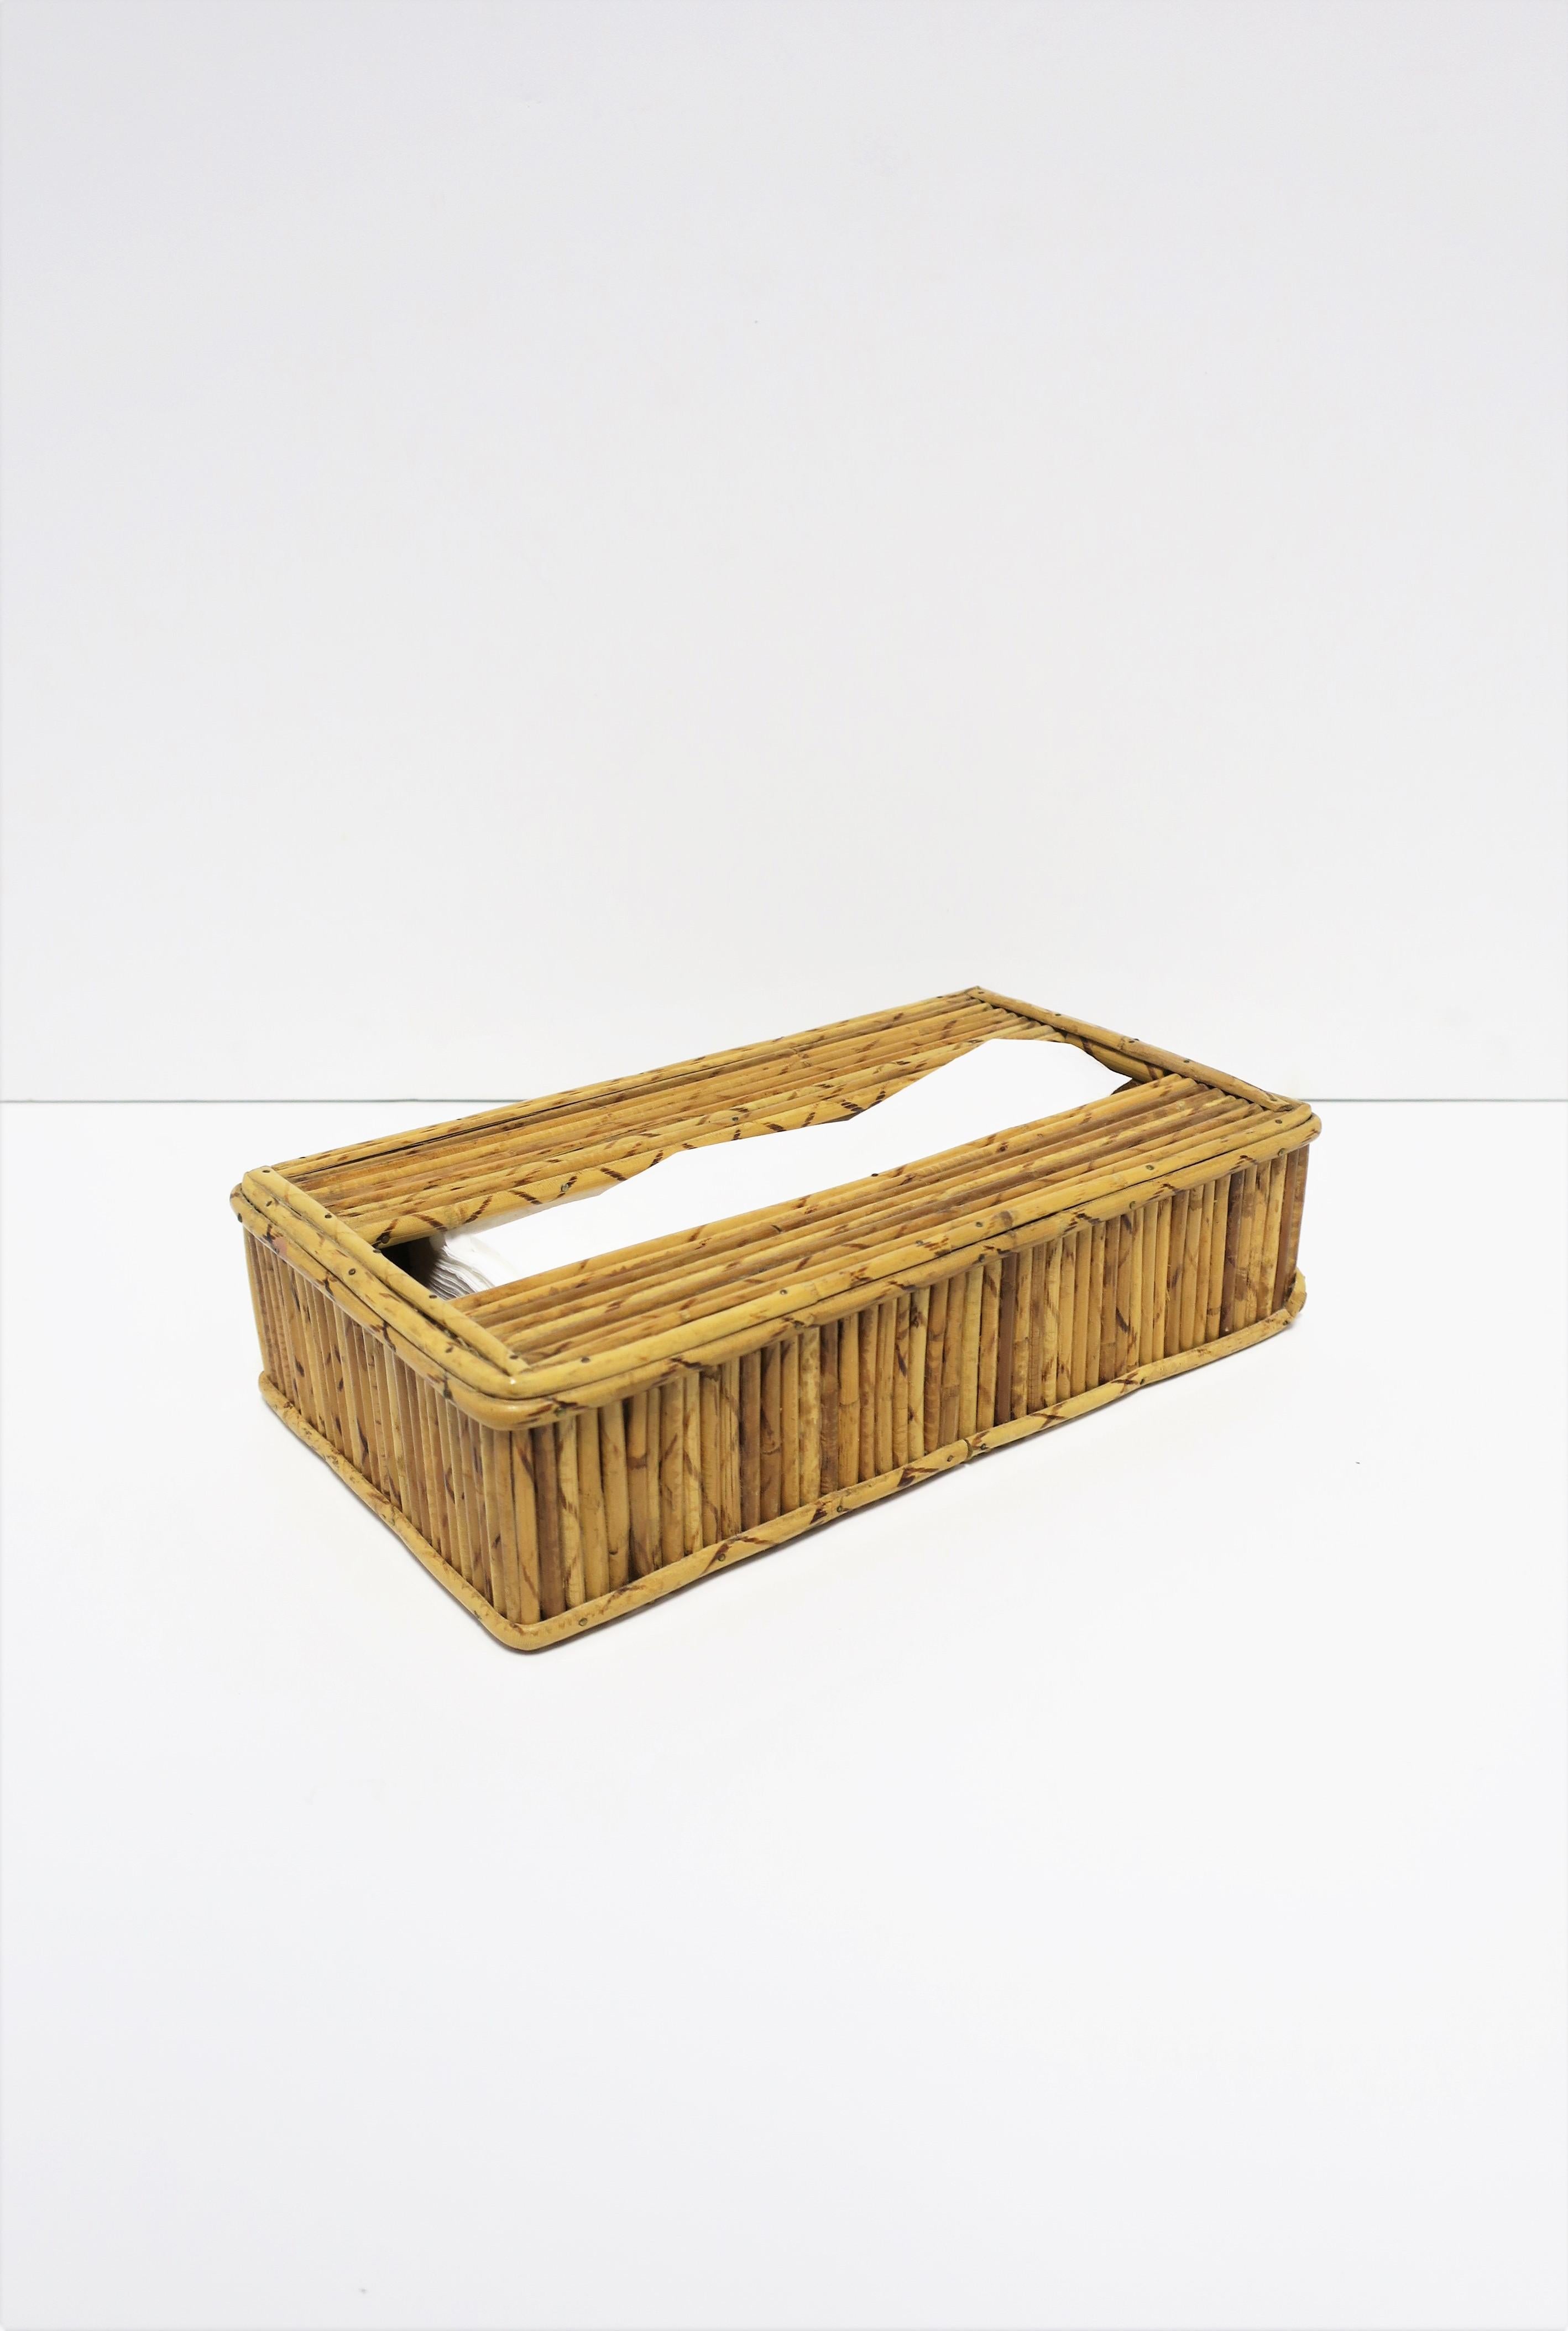 Wicker Tissue Box Cover Holder in the Crespi Style For Sale 1